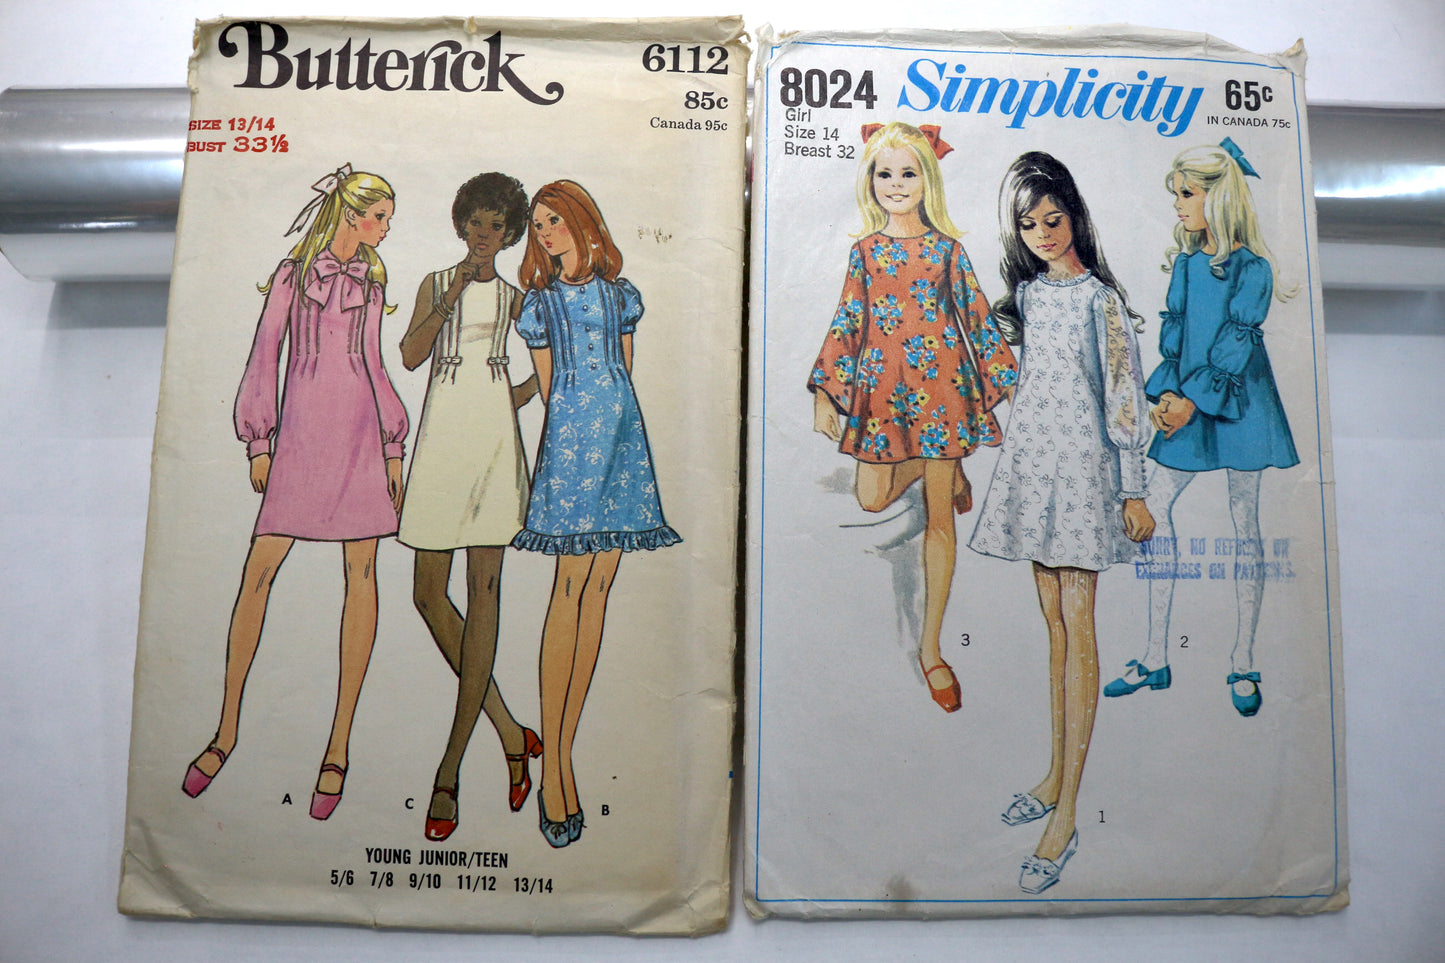 Butterick 6112 Junior Dress Sewing Pattern or Simplicity 8024 Junior Dress Sewing Pattern